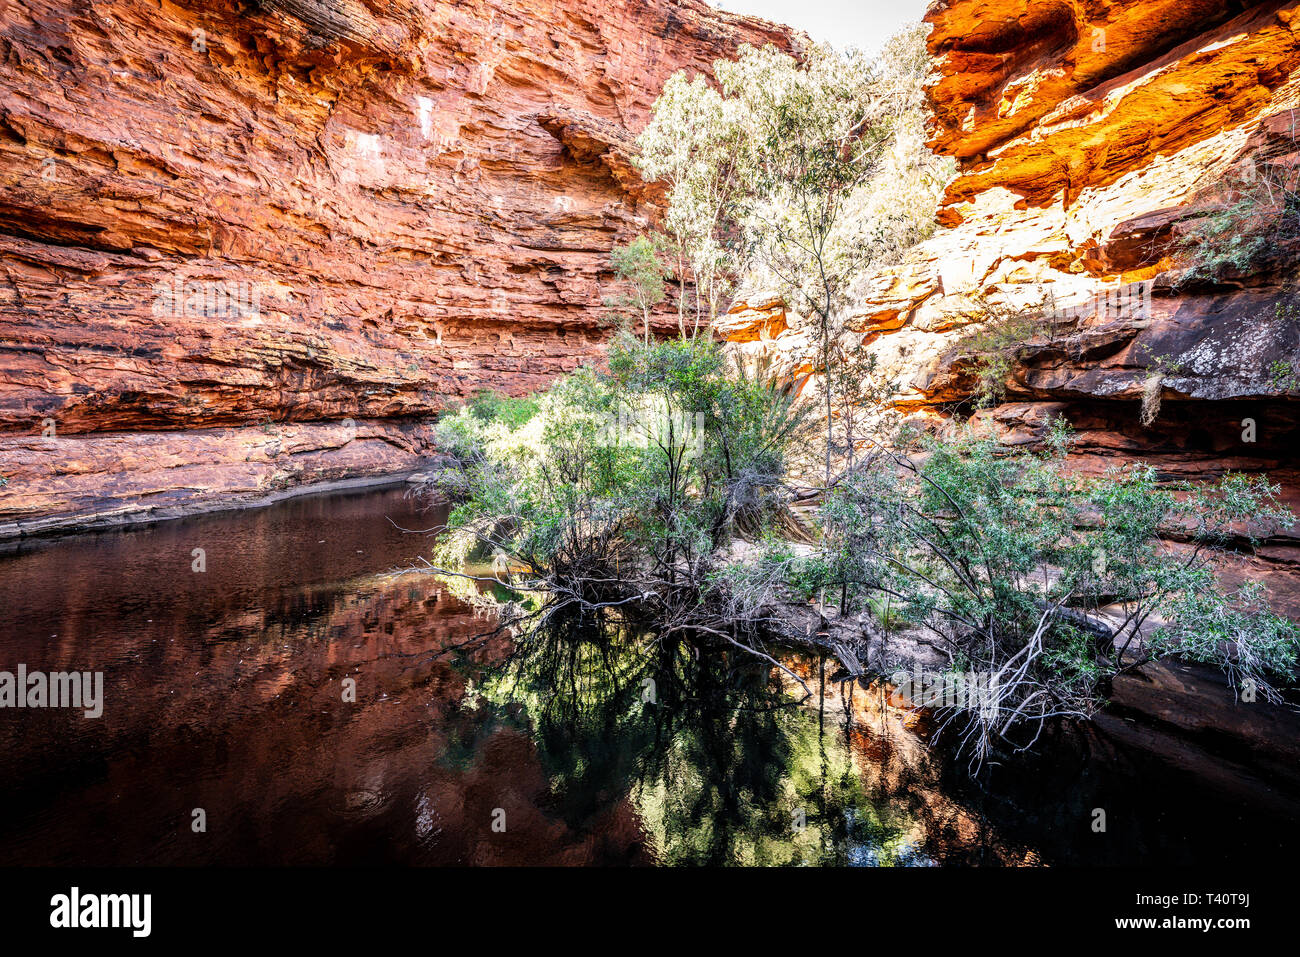 View Of The Waterhole In The Garden Of Eden In Kings Canyon In Nt